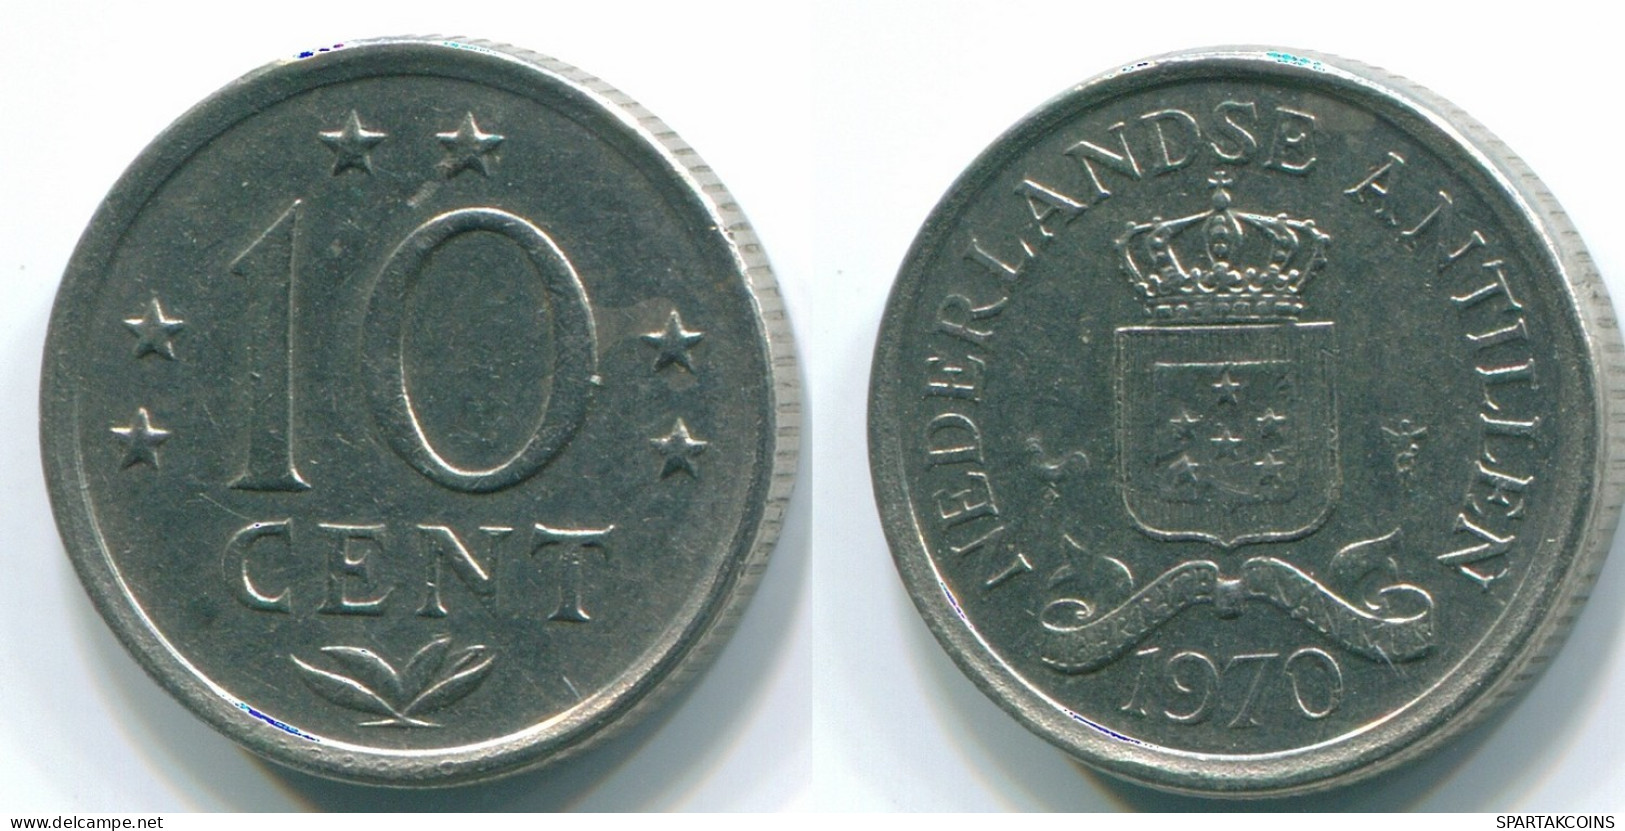 10 CENTS 1970 NETHERLANDS ANTILLES Nickel Colonial Coin #S13359.U.A - Netherlands Antilles